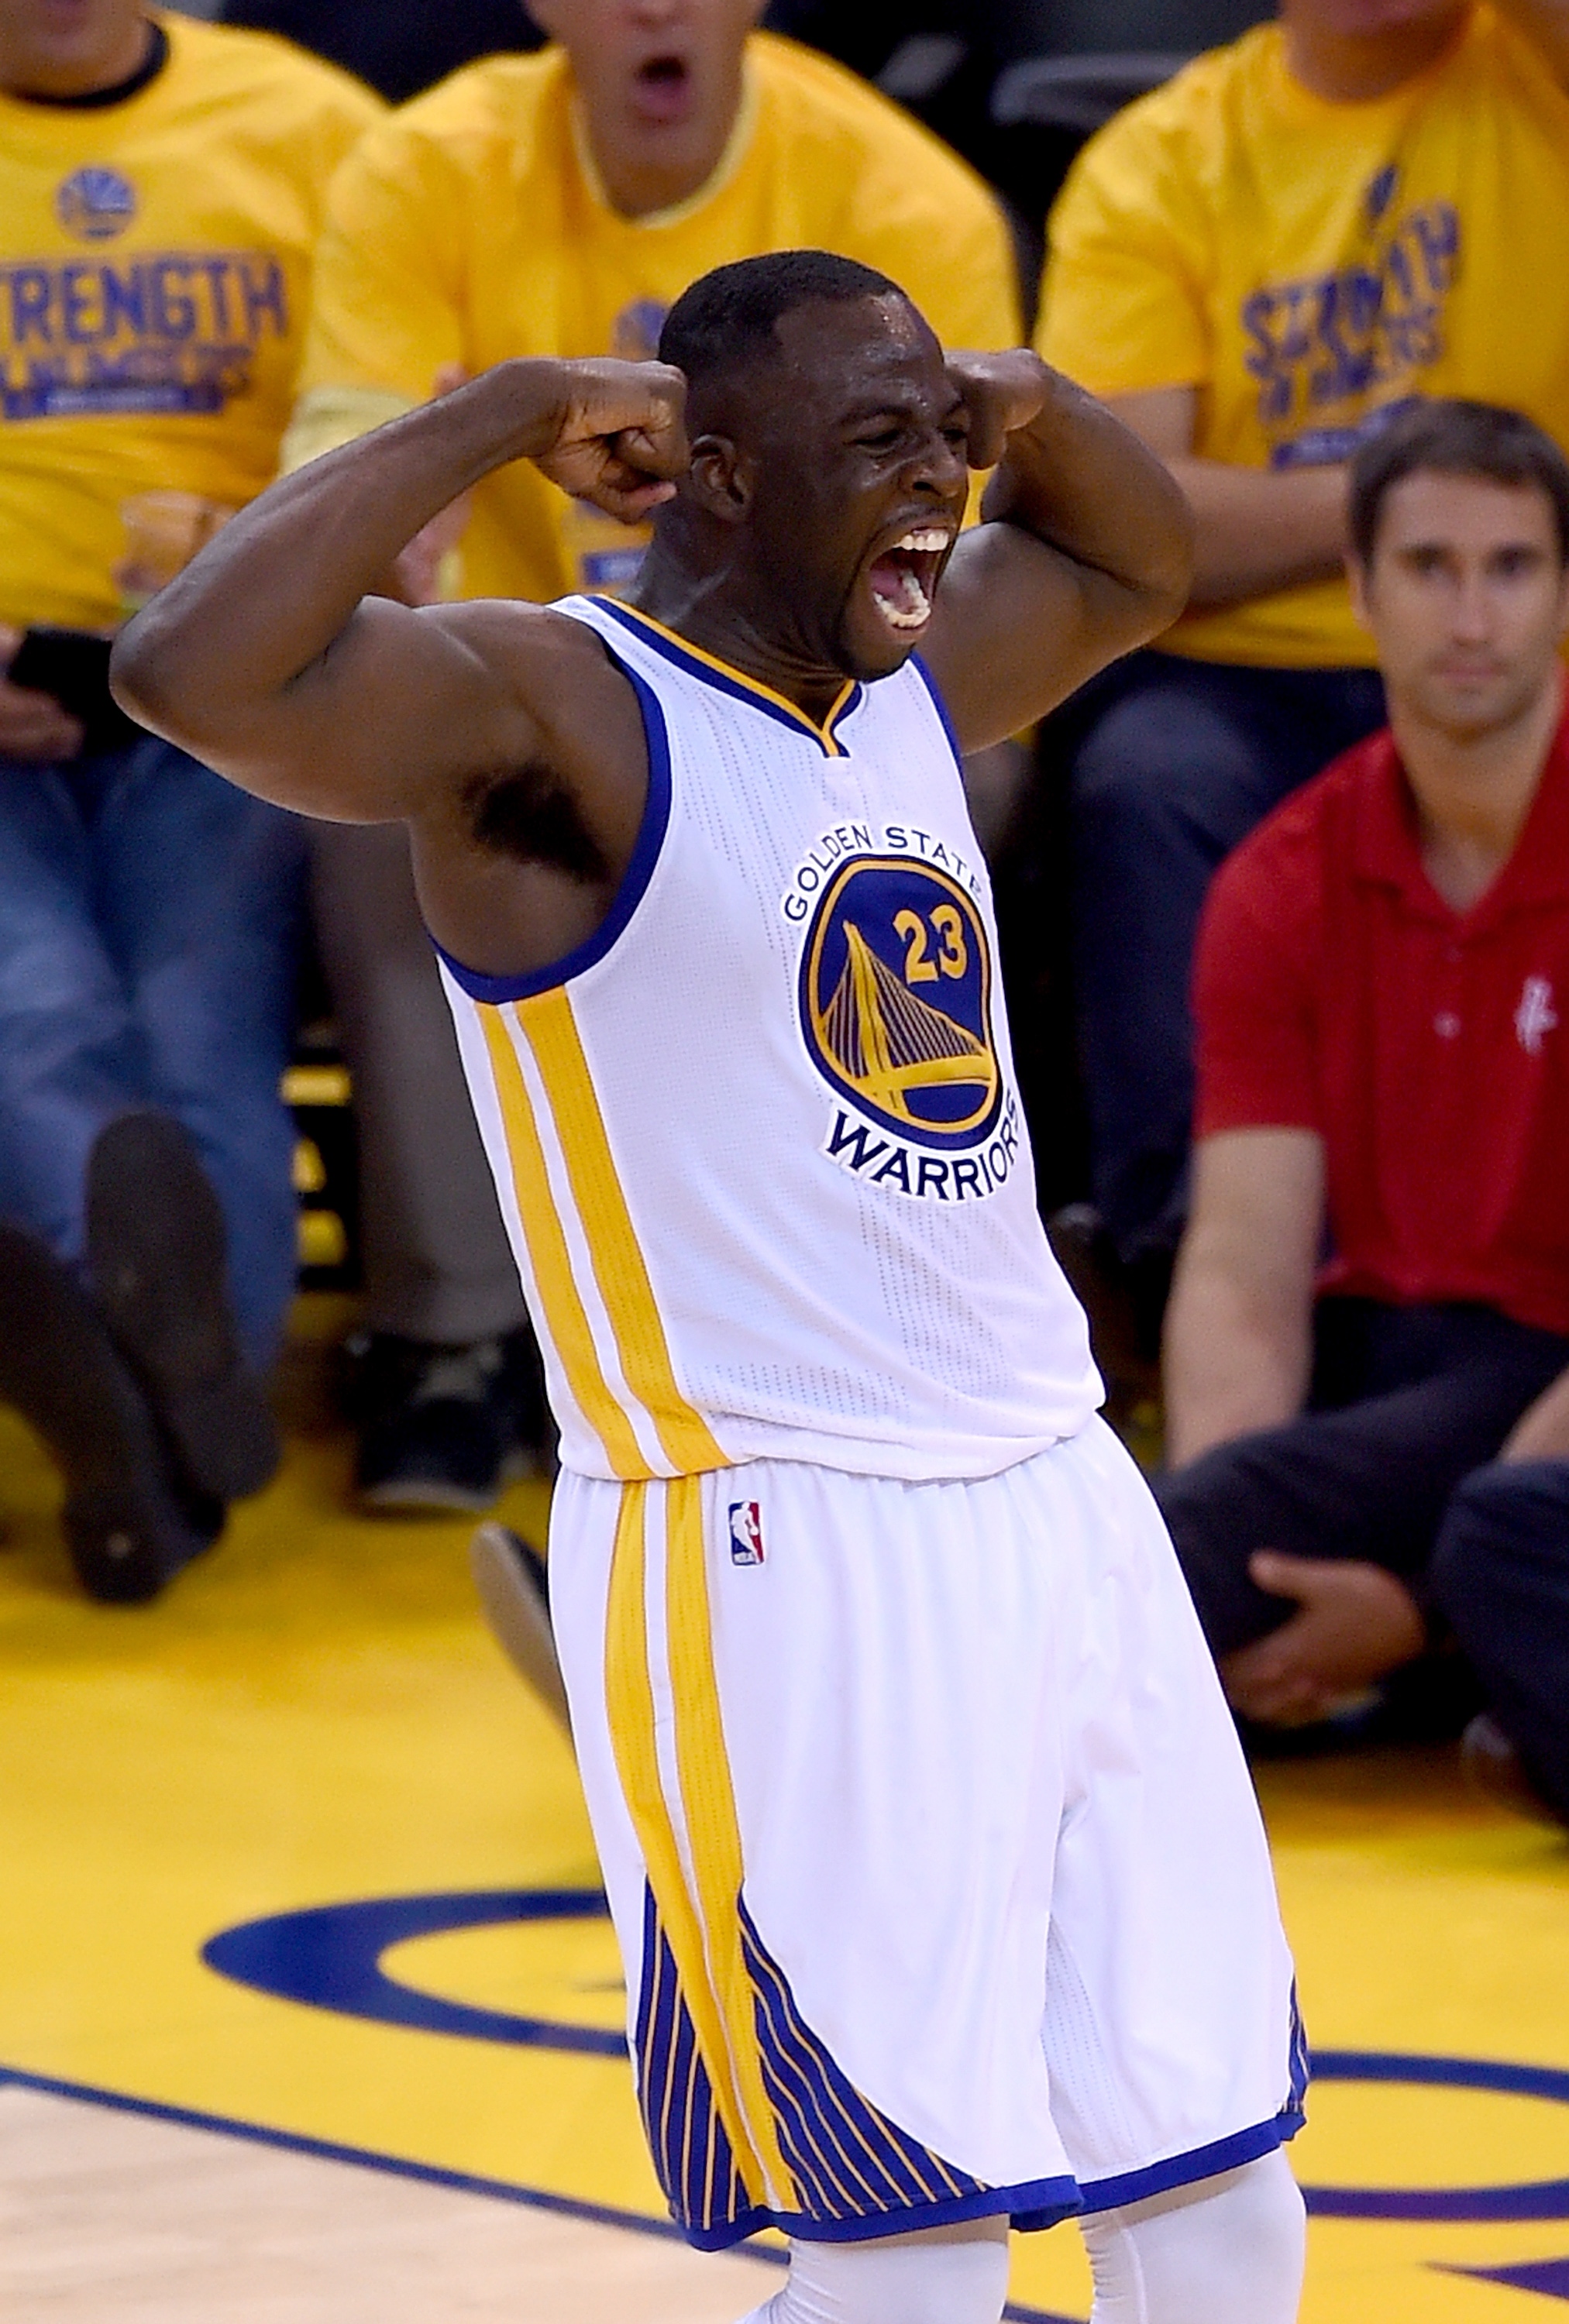 OAKLAND, CA - MAY 21:  Draymond Green #23 of the Golden State Warriors reacts after scoring and being fouled on the shot by Dwight Howard #12 of the Houston Rockets during the second half in Game Two of the Western Conference Finals of the NBA Playoffs at ORACLE Arena on May 21, 2015 in Oakland, California. NOTE TO USER: User expressly acknowledges and agrees that, by downloading and or using this photograph, User is consenting to the terms and conditions of the Getty Images License Agreement.  (Photo by Thearon W. Henderson/Getty Images)